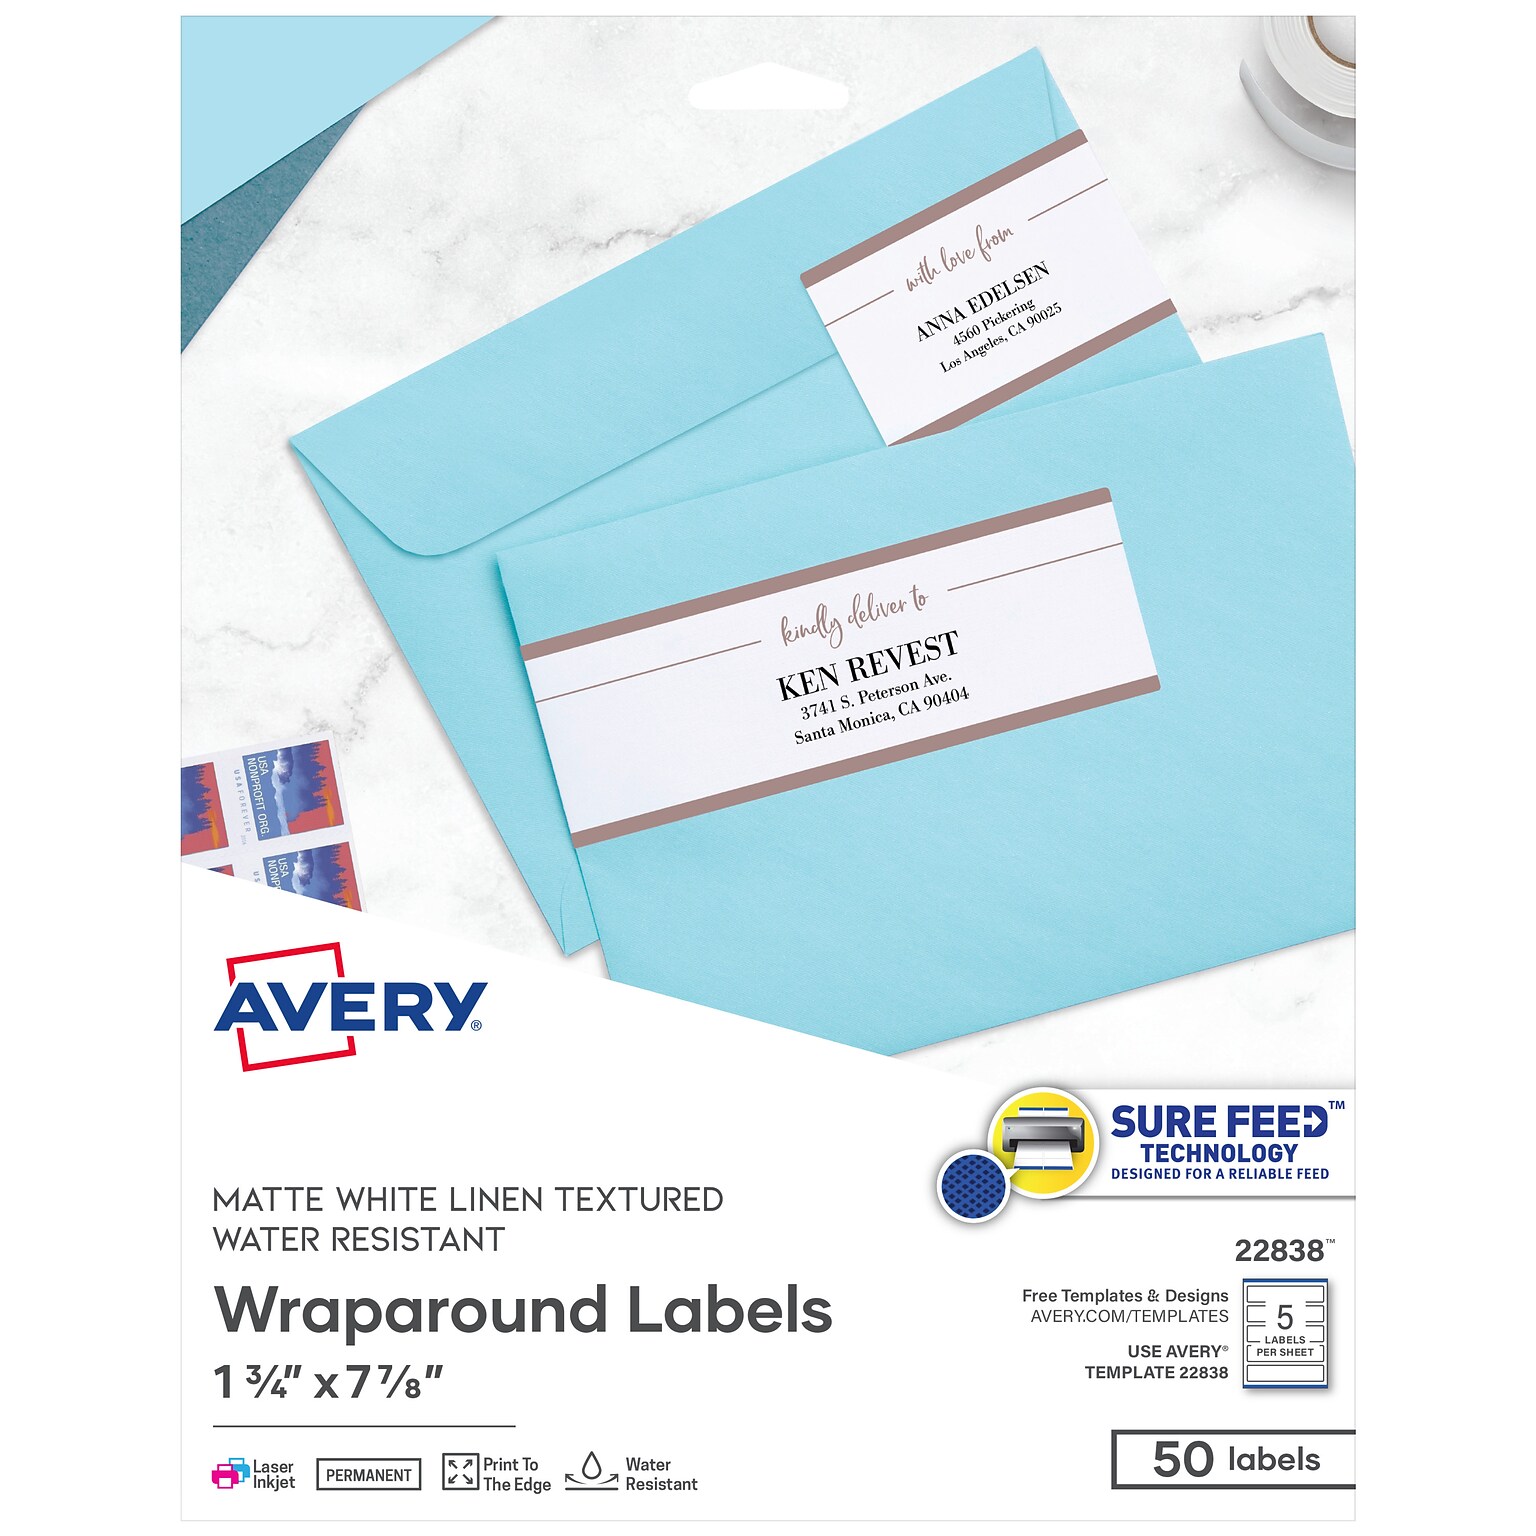 Avery Print-to-the-Edge Laser/Inkjet Labels, 7.85 x 1.75, White, 5 Labels/Sheet, 10 Sheets/Pack, 50 Labels/Pack (22838)